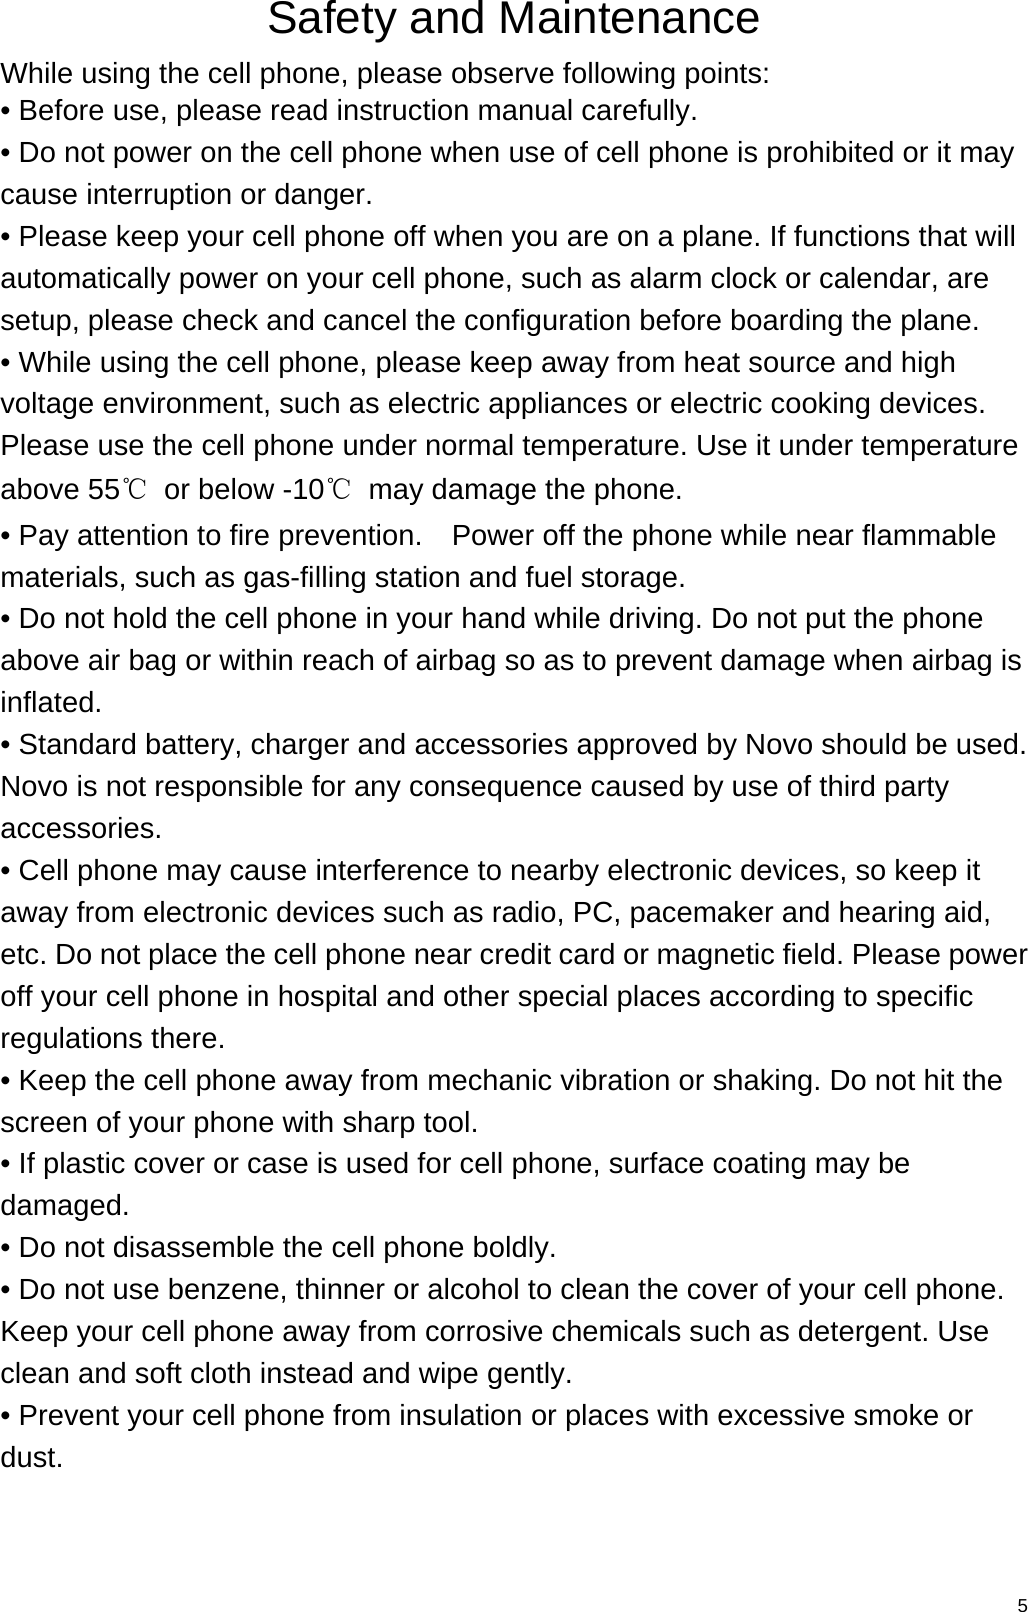   5Safety and Maintenance While using the cell phone, please observe following points: • Before use, please read instruction manual carefully. • Do not power on the cell phone when use of cell phone is prohibited or it may cause interruption or danger. • Please keep your cell phone off when you are on a plane. If functions that will automatically power on your cell phone, such as alarm clock or calendar, are setup, please check and cancel the configuration before boarding the plane. • While using the cell phone, please keep away from heat source and high voltage environment, such as electric appliances or electric cooking devices. Please use the cell phone under normal temperature. Use it under temperature above 55℃  or below -10℃  may damage the phone. • Pay attention to fire prevention.    Power off the phone while near flammable materials, such as gas-filling station and fuel storage. • Do not hold the cell phone in your hand while driving. Do not put the phone above air bag or within reach of airbag so as to prevent damage when airbag is inflated. • Standard battery, charger and accessories approved by Novo should be used. Novo is not responsible for any consequence caused by use of third party accessories. • Cell phone may cause interference to nearby electronic devices, so keep it away from electronic devices such as radio, PC, pacemaker and hearing aid, etc. Do not place the cell phone near credit card or magnetic field. Please power off your cell phone in hospital and other special places according to specific regulations there. • Keep the cell phone away from mechanic vibration or shaking. Do not hit the screen of your phone with sharp tool. • If plastic cover or case is used for cell phone, surface coating may be damaged. • Do not disassemble the cell phone boldly. • Do not use benzene, thinner or alcohol to clean the cover of your cell phone. Keep your cell phone away from corrosive chemicals such as detergent. Use clean and soft cloth instead and wipe gently. • Prevent your cell phone from insulation or places with excessive smoke or dust. 